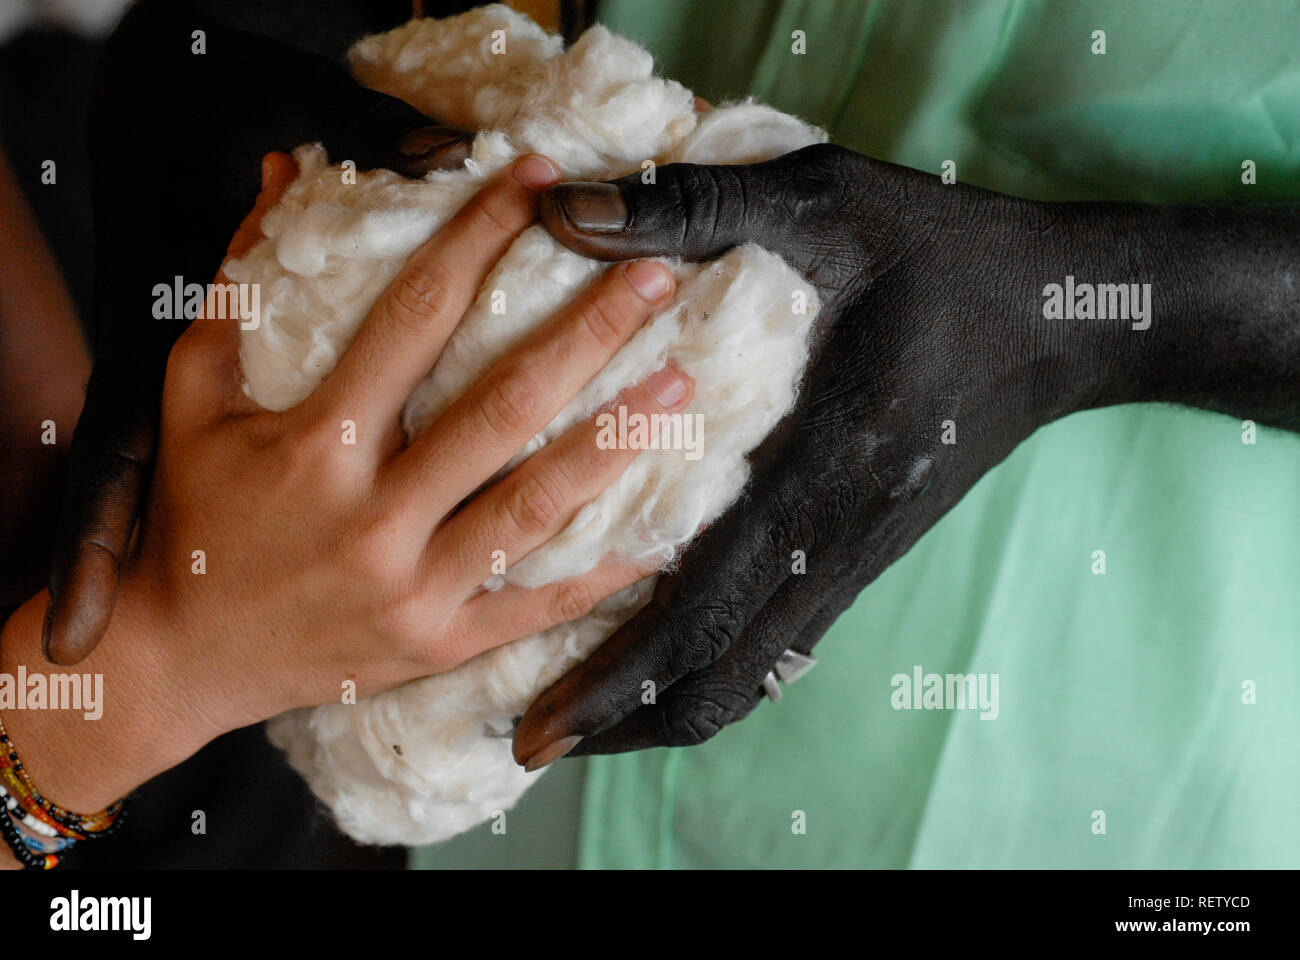 MALI , conference about fair trade cotton, black and white hand holding symbolic together fair trade organic cotton , different skin colour, african and european, dialogue, north south exchange, black and white people , man and woman Stock Photo